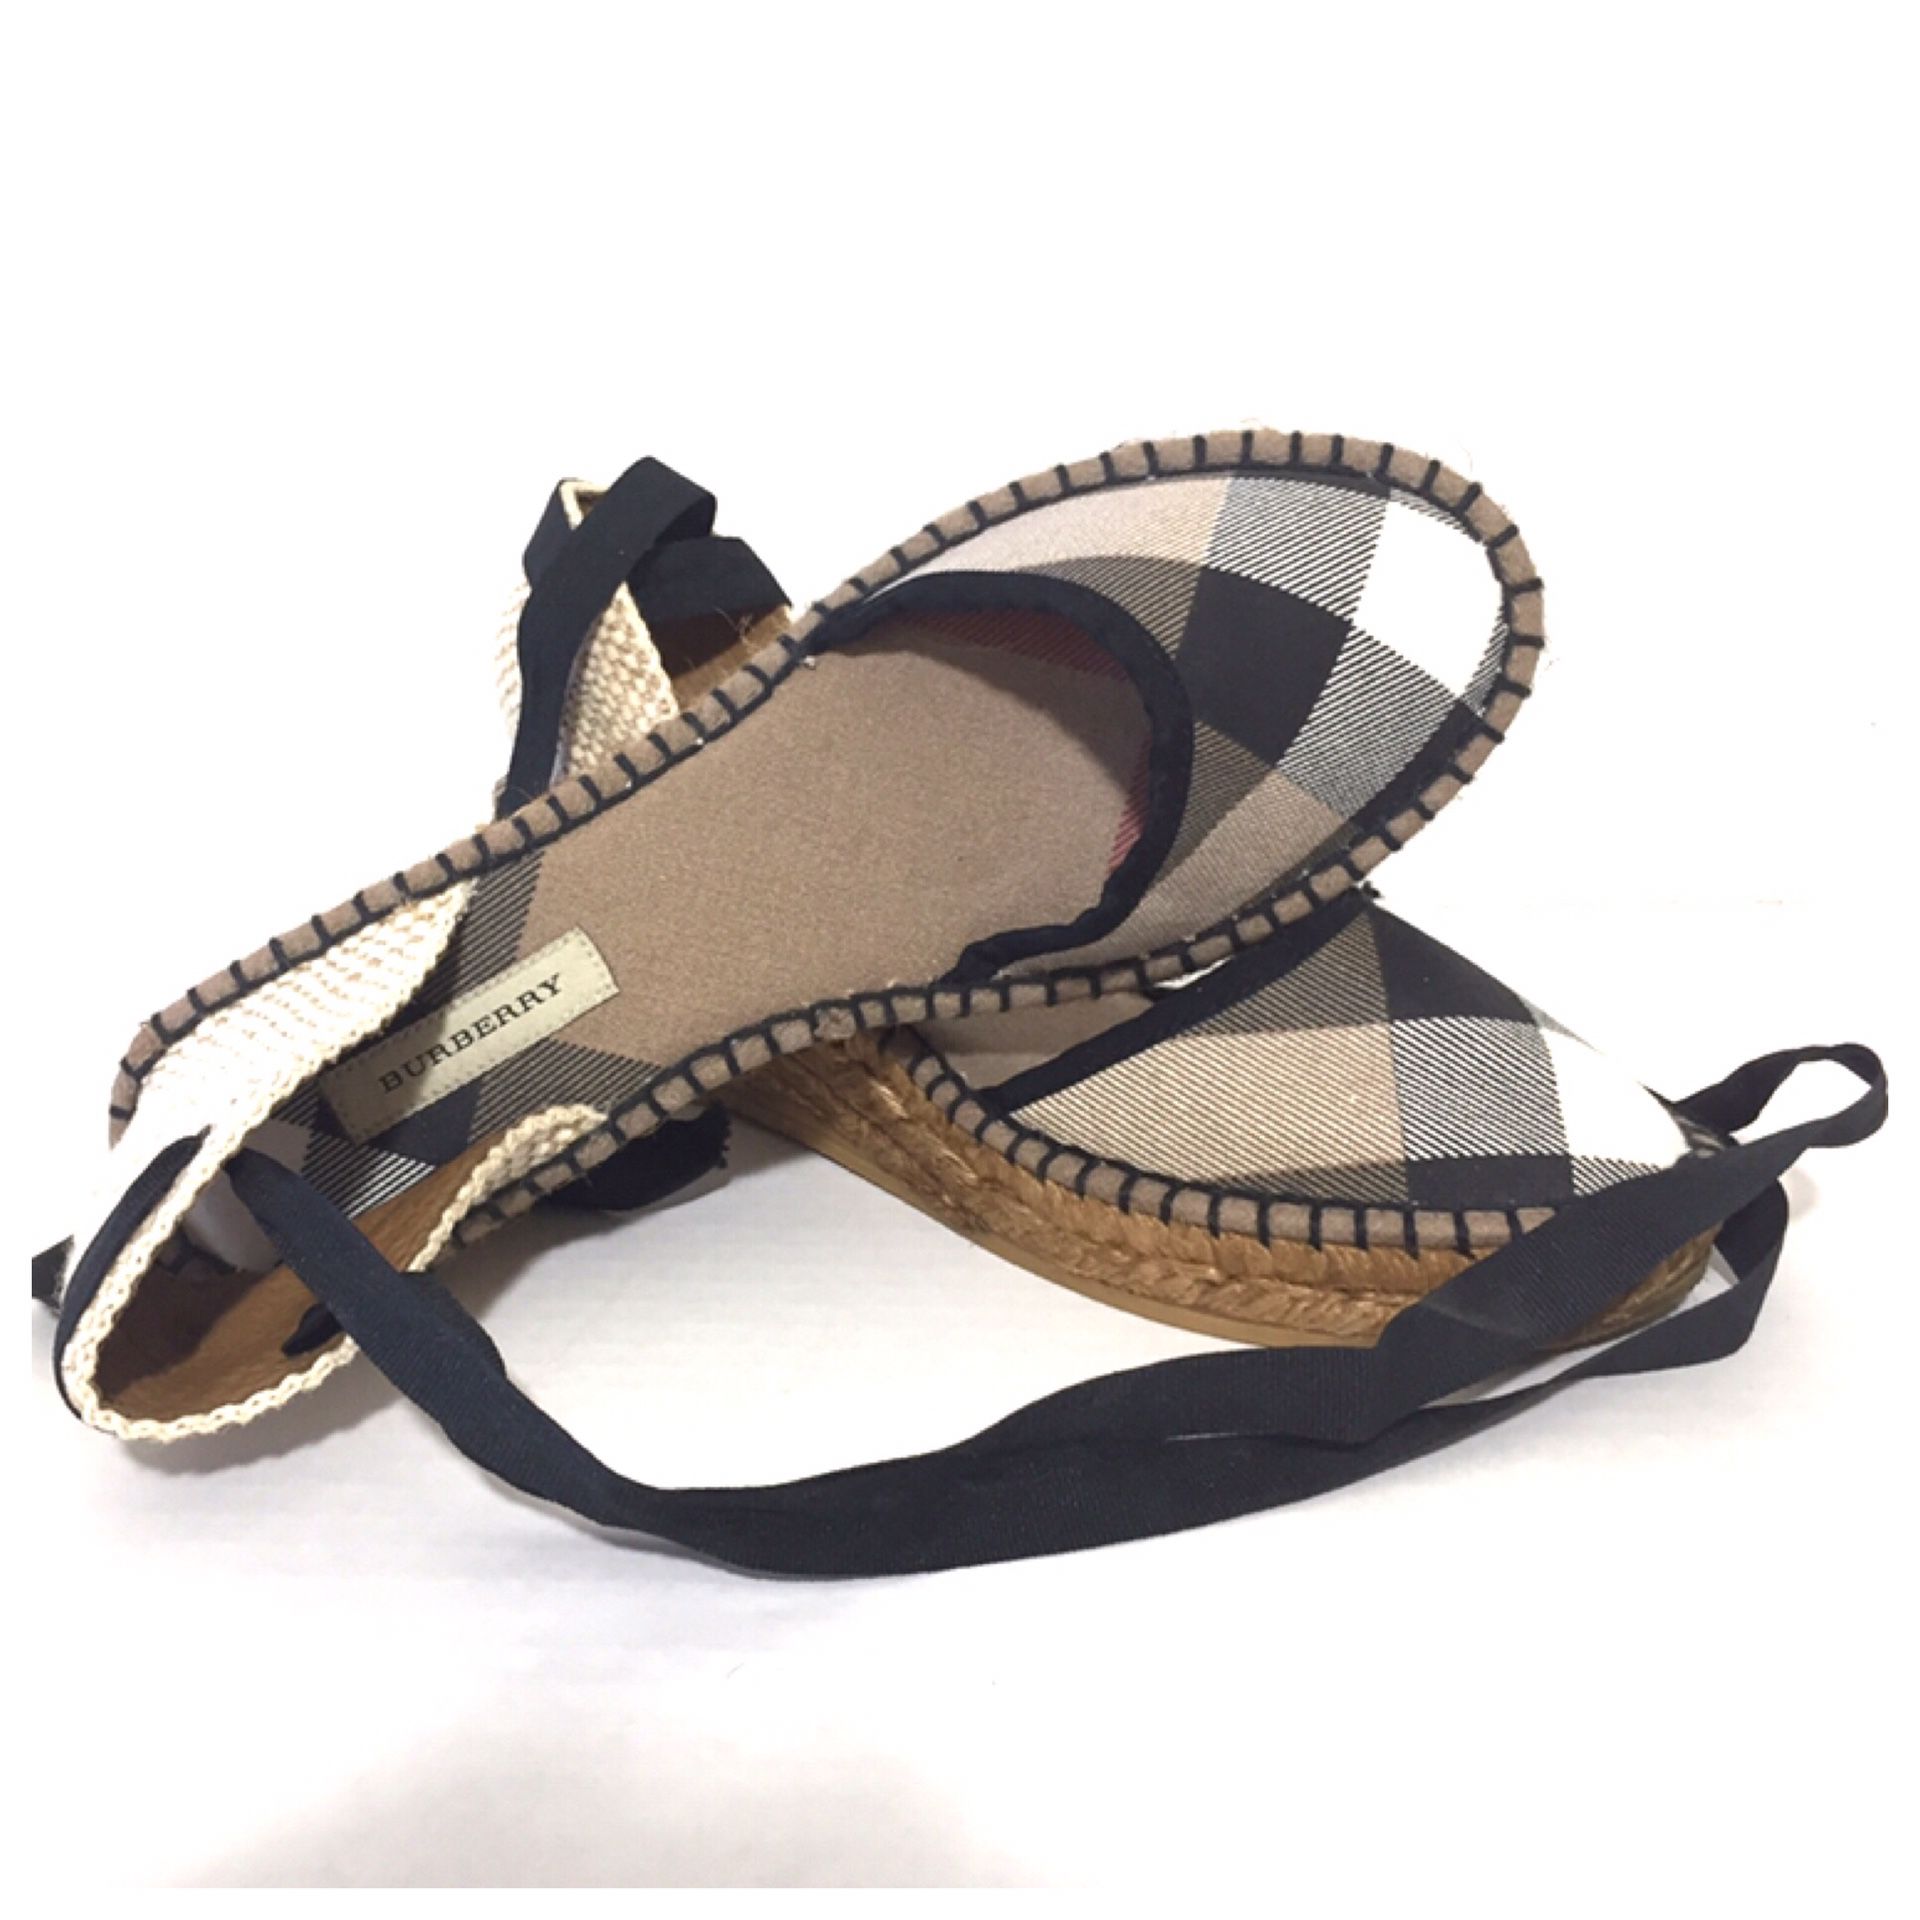 Burberry Lace Up Check Wedge Espadrille Sandals Size 36